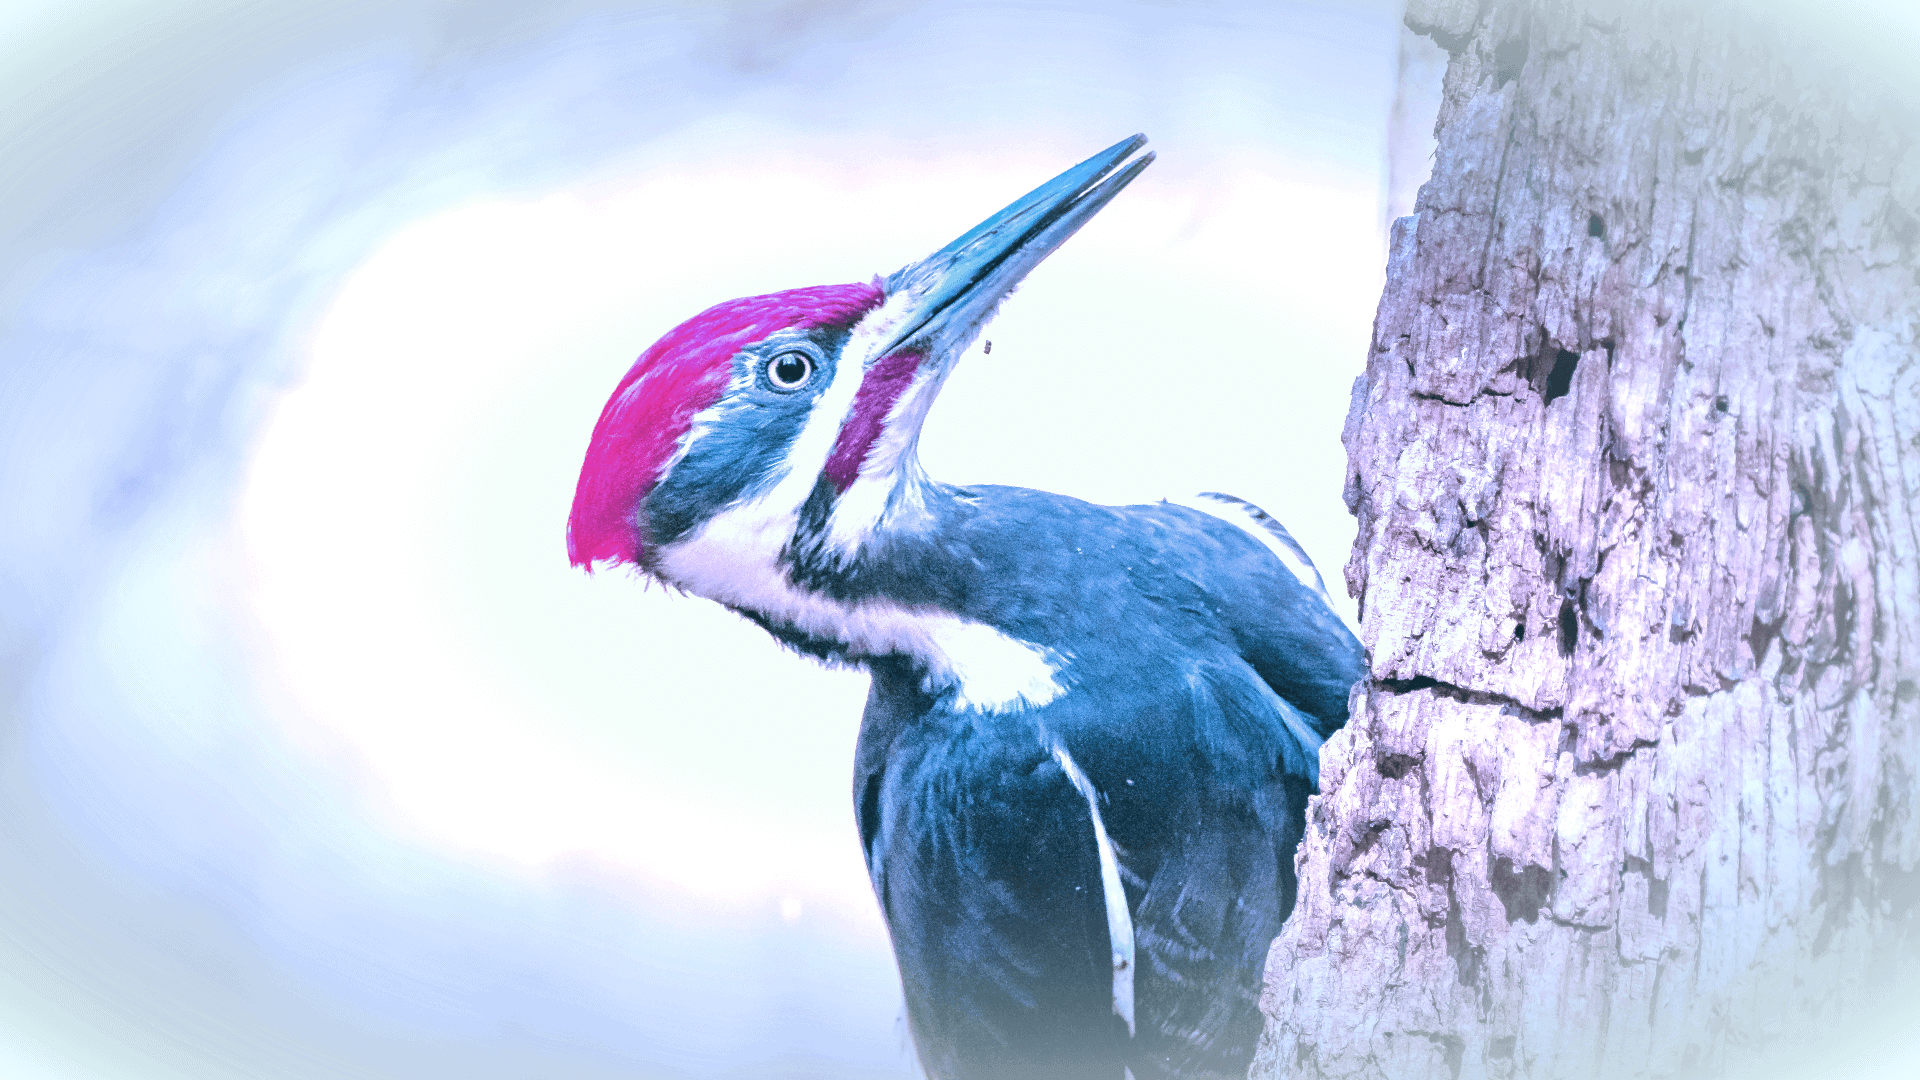 pileated woodpecker symbolism and meaning